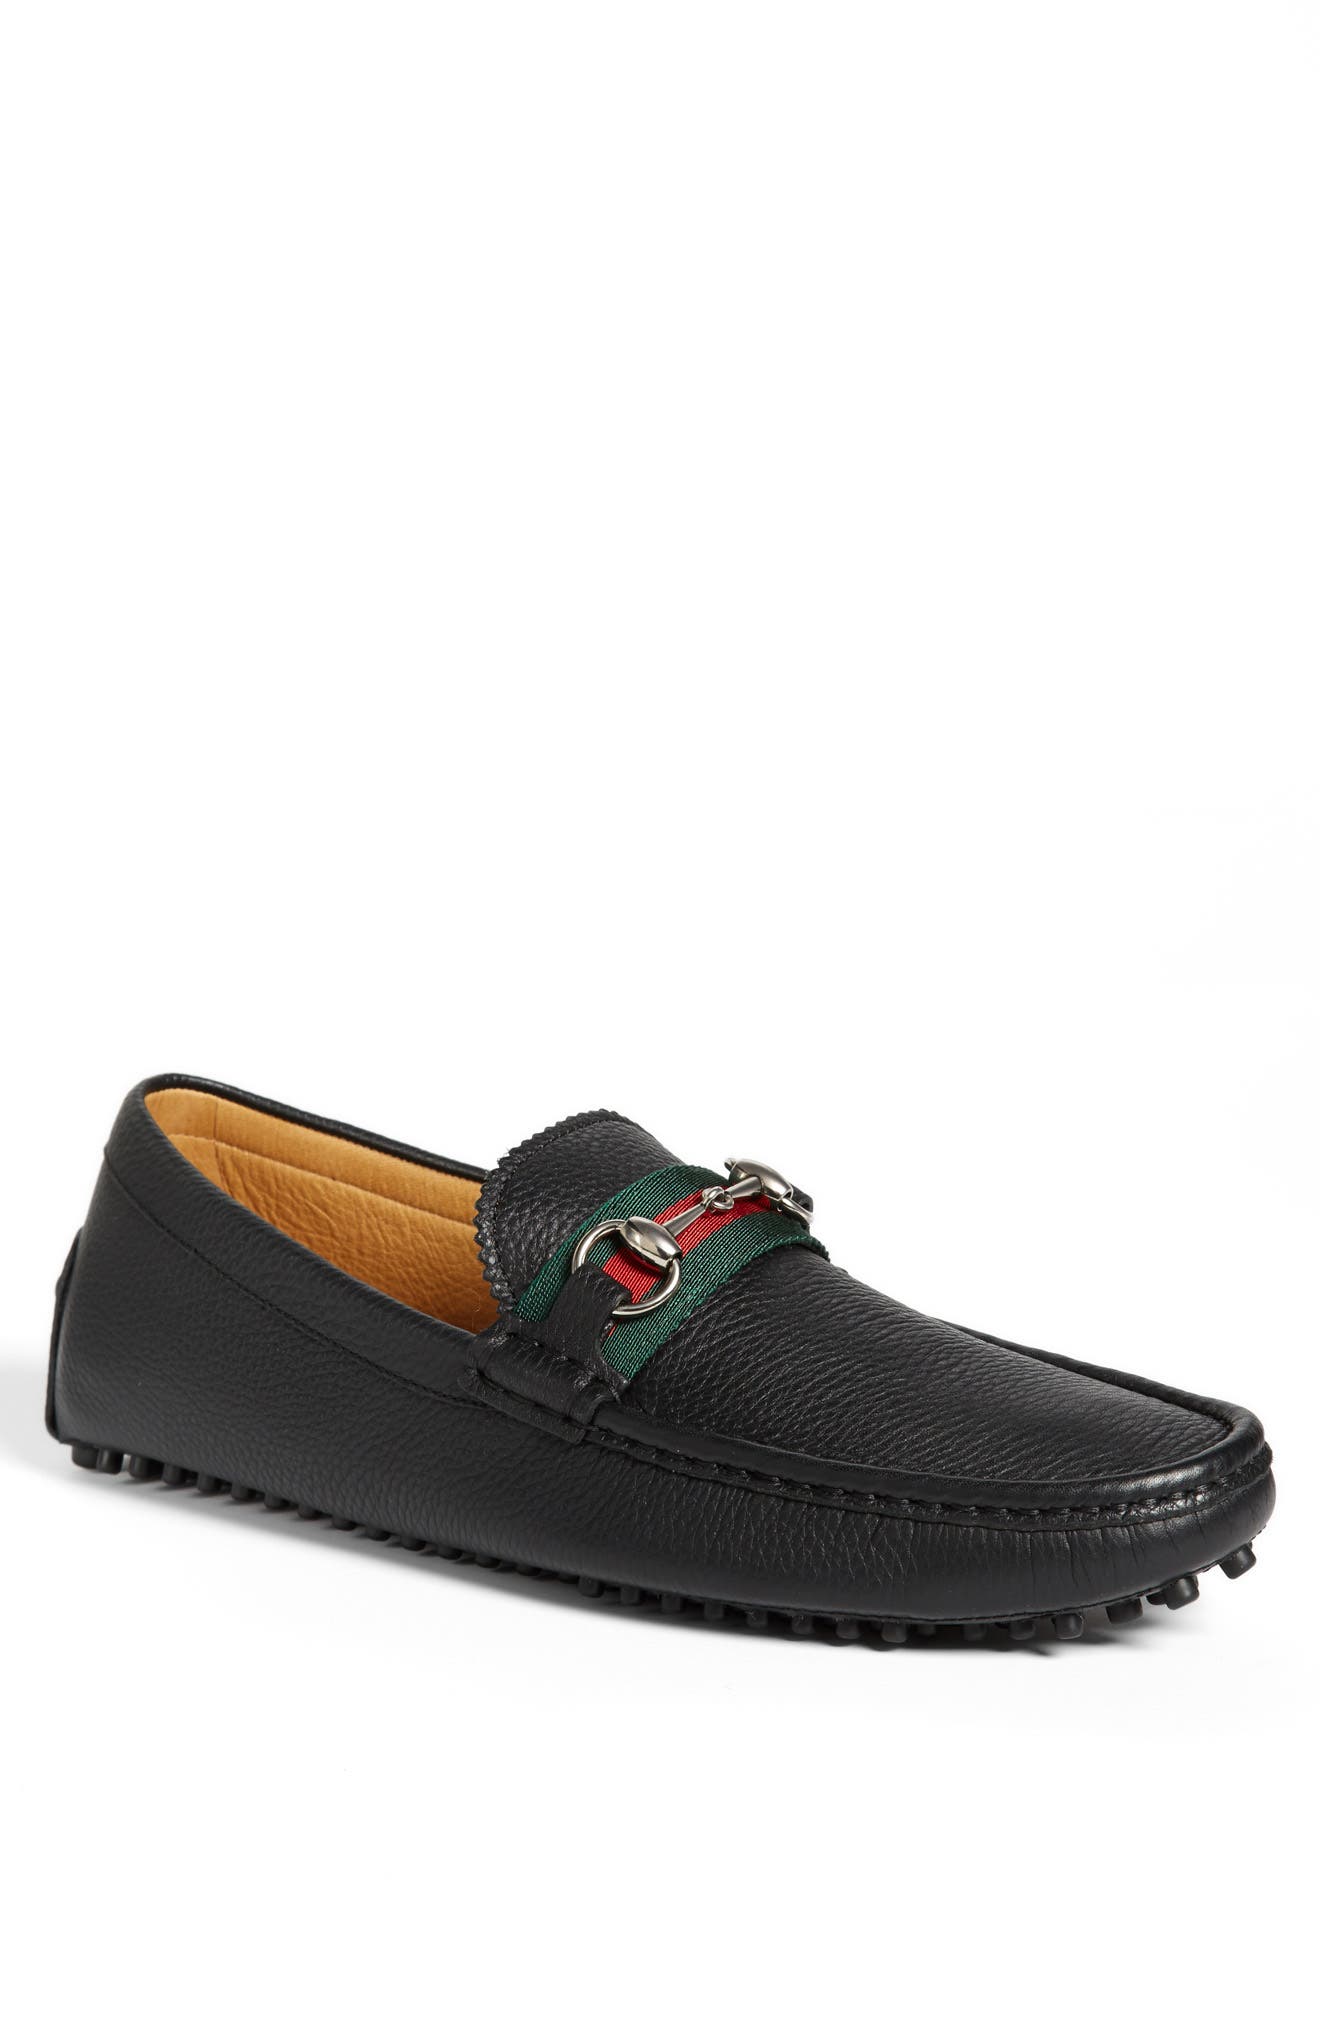 gucci driving shoes